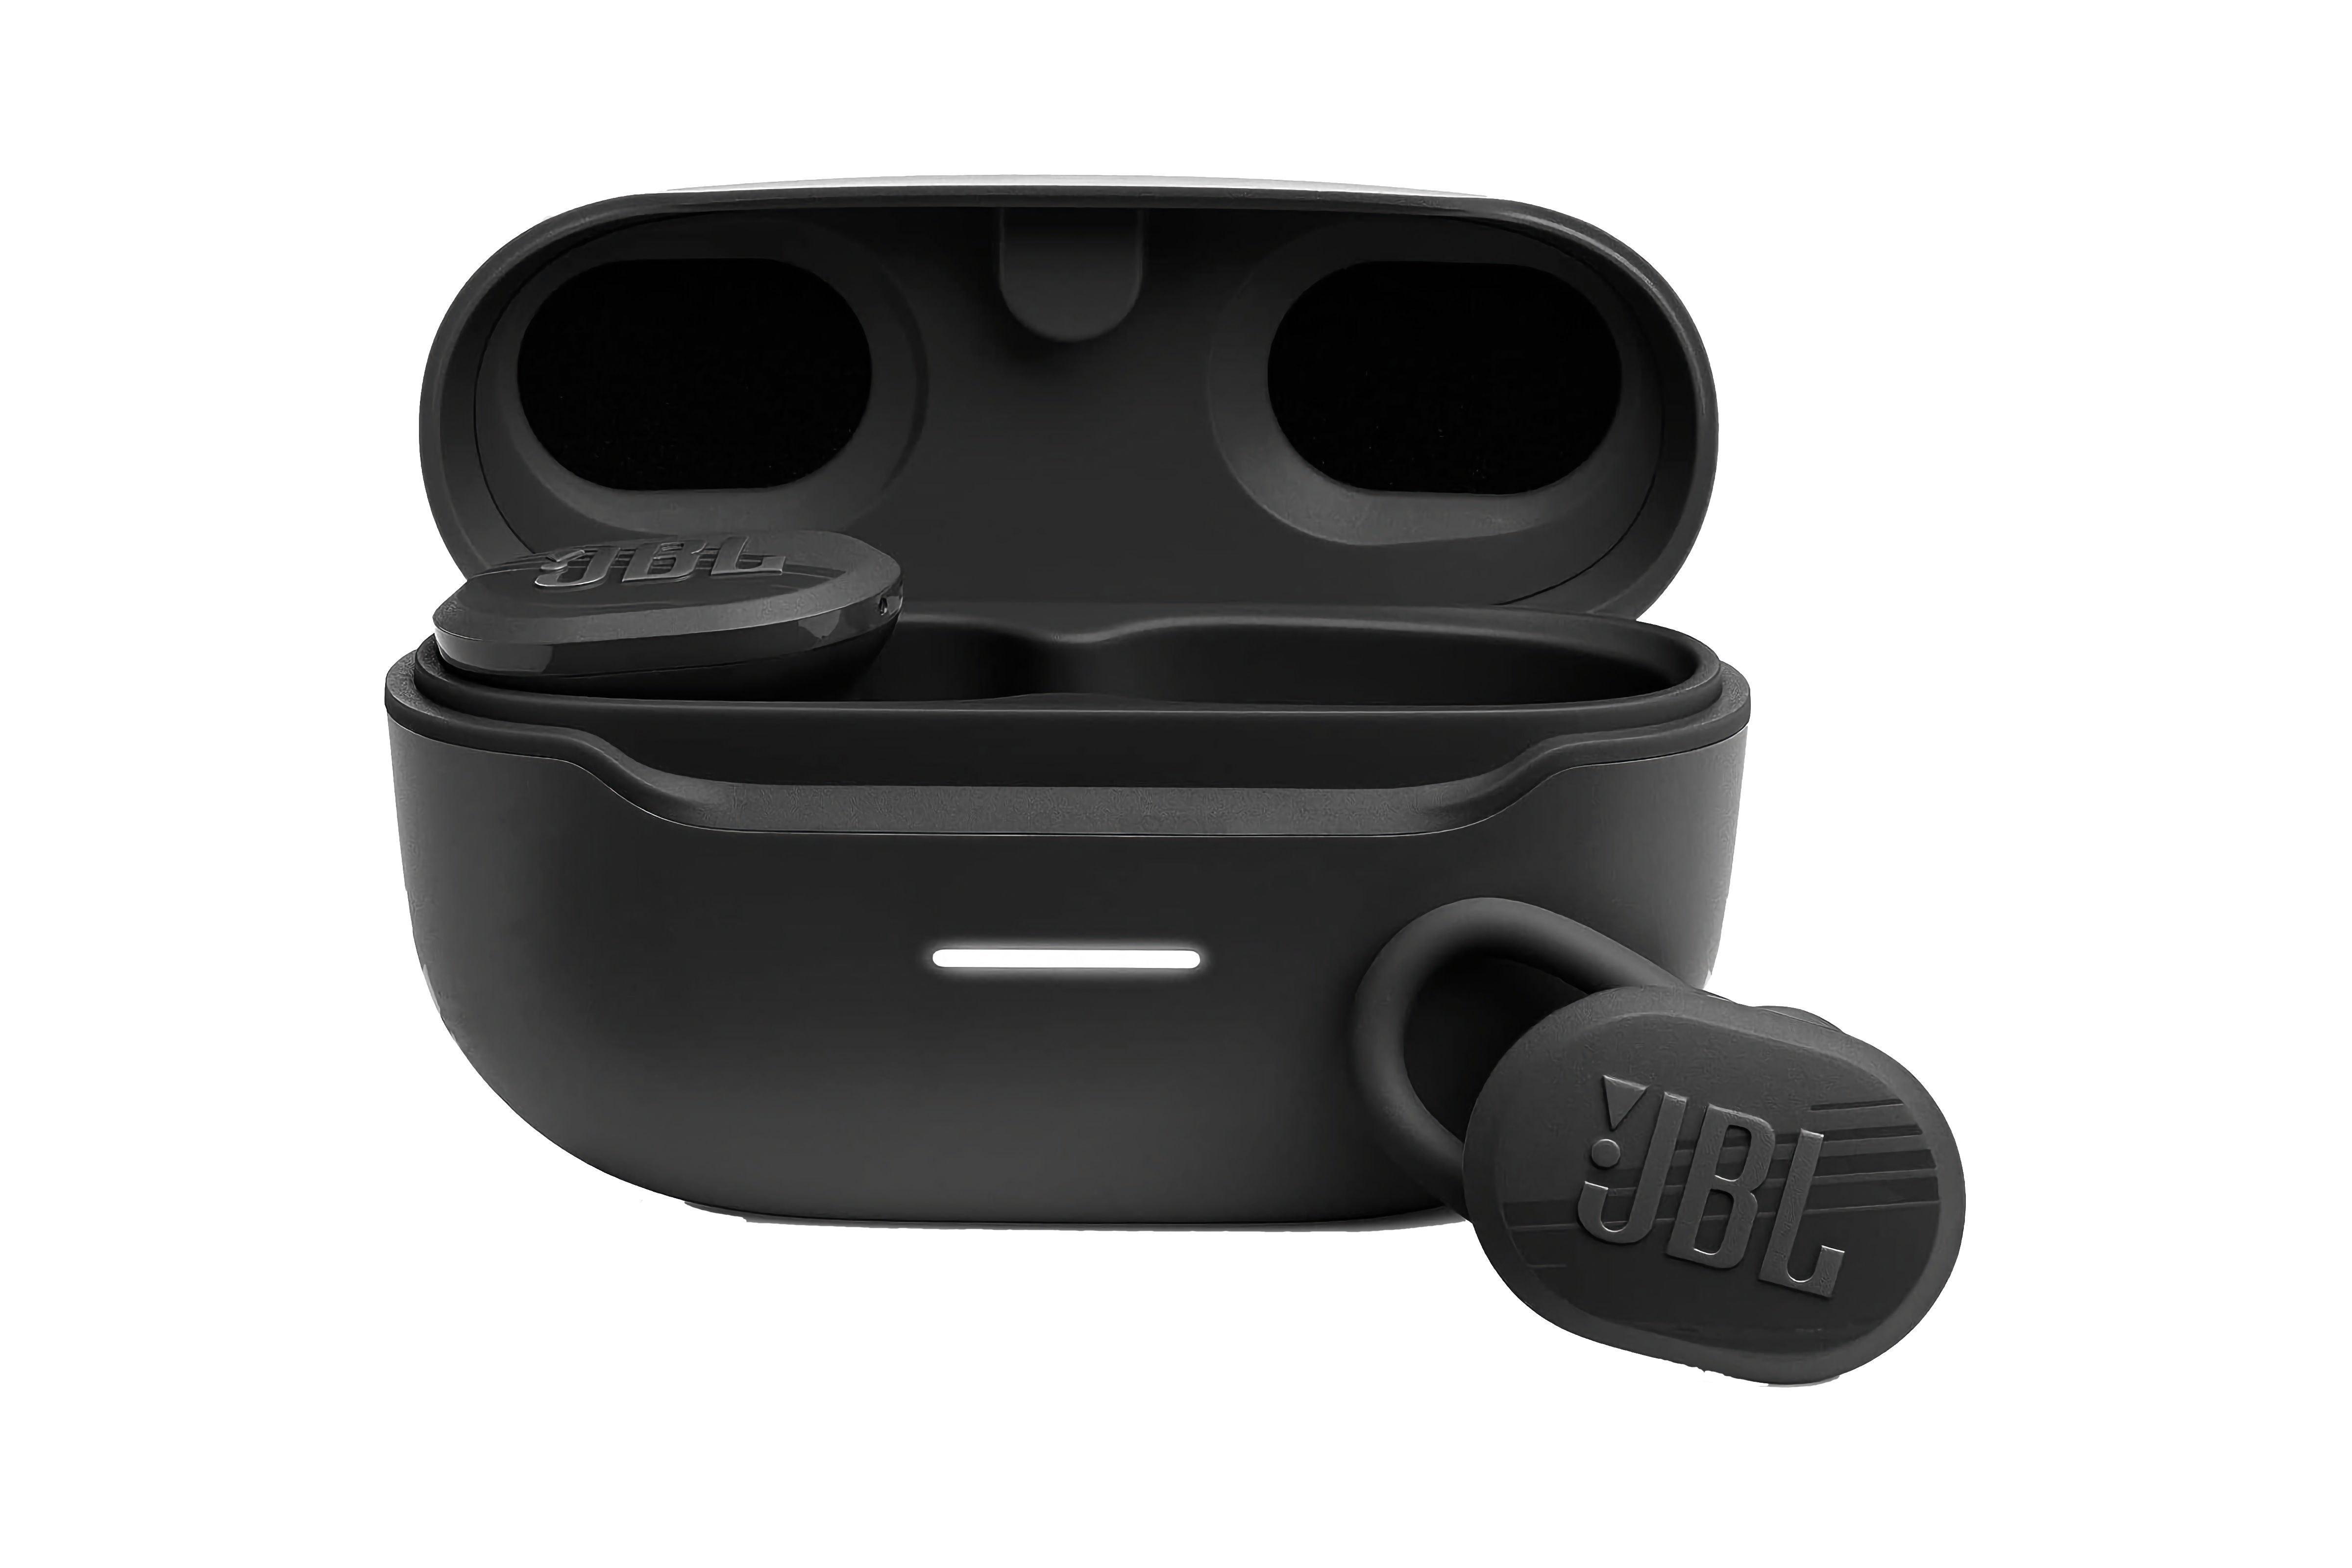 Black earbuds with a silicone loop sitting in front of a charging case.